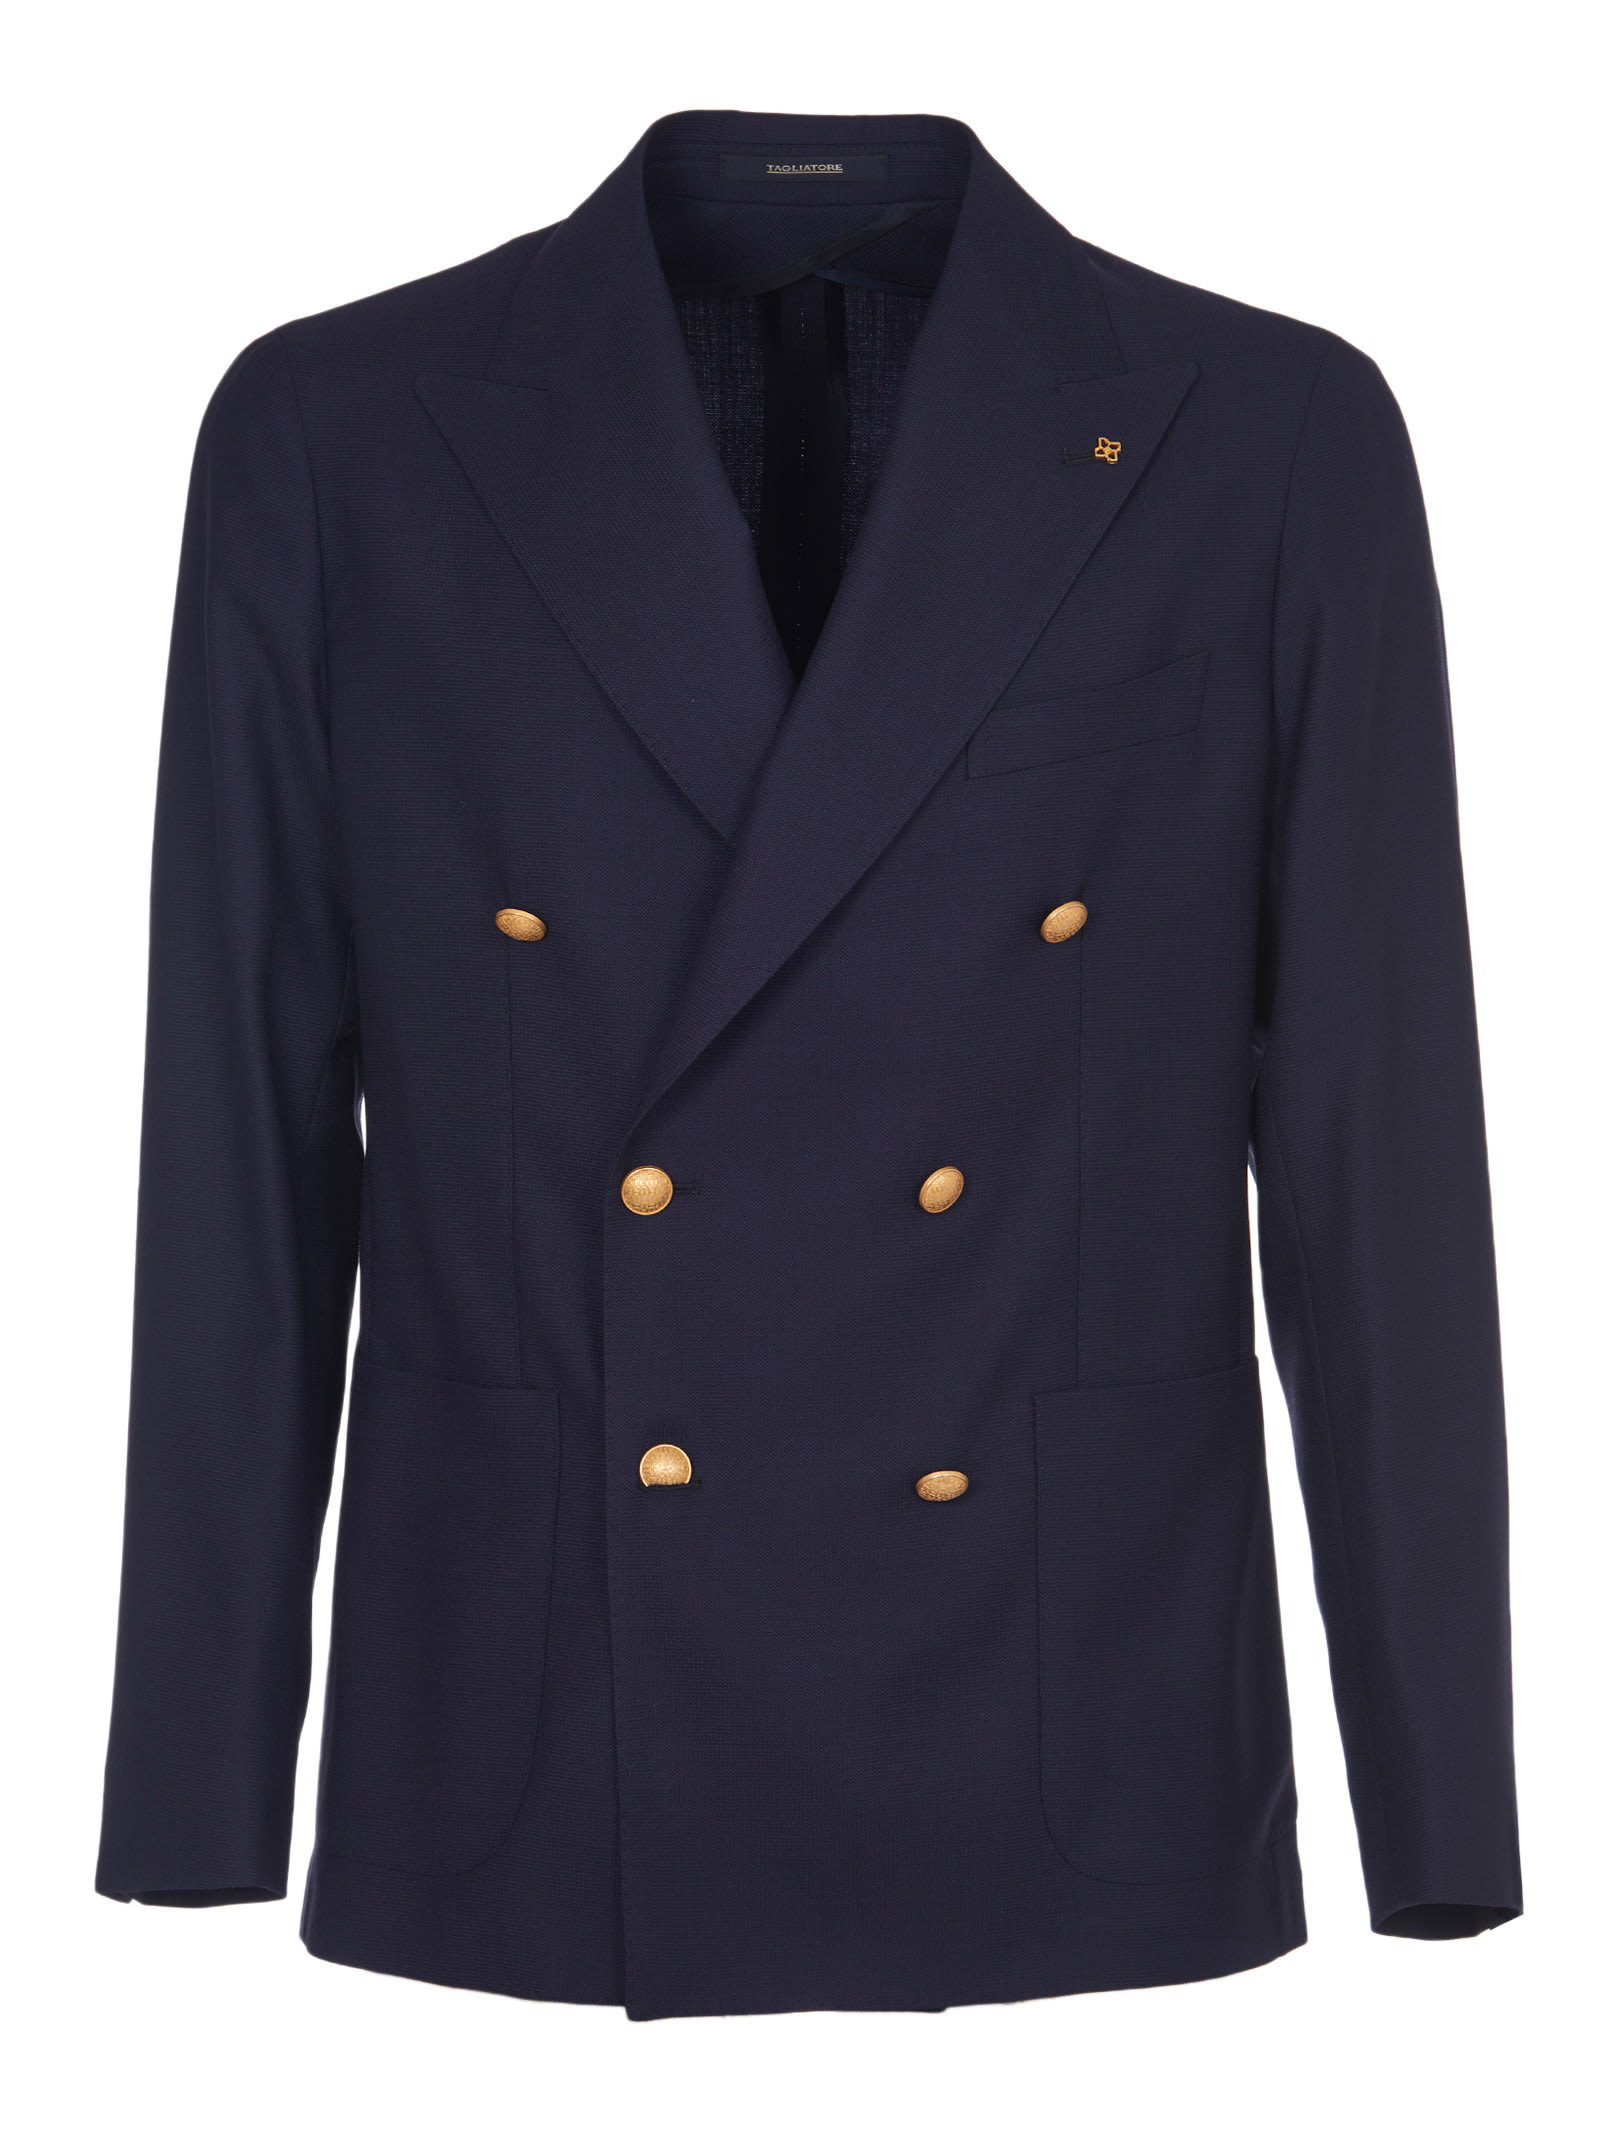 Tagliatore Double-breasted Blue Jacket